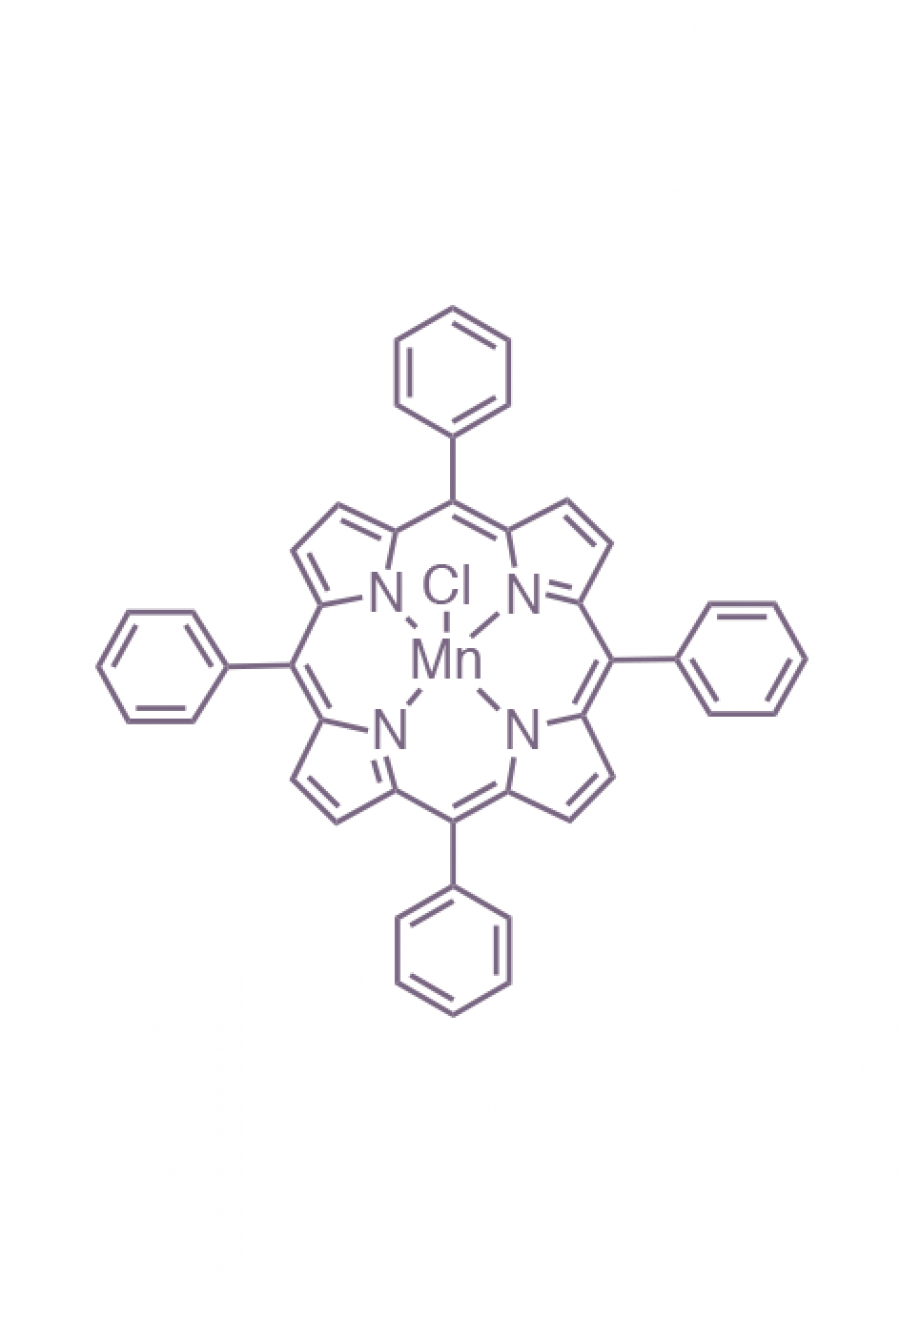 manganese(III) 5,10,15,20-(tetraphenyl)porphyrin chloride  | Porphychem Expert porphyrin synthesis for research & industry